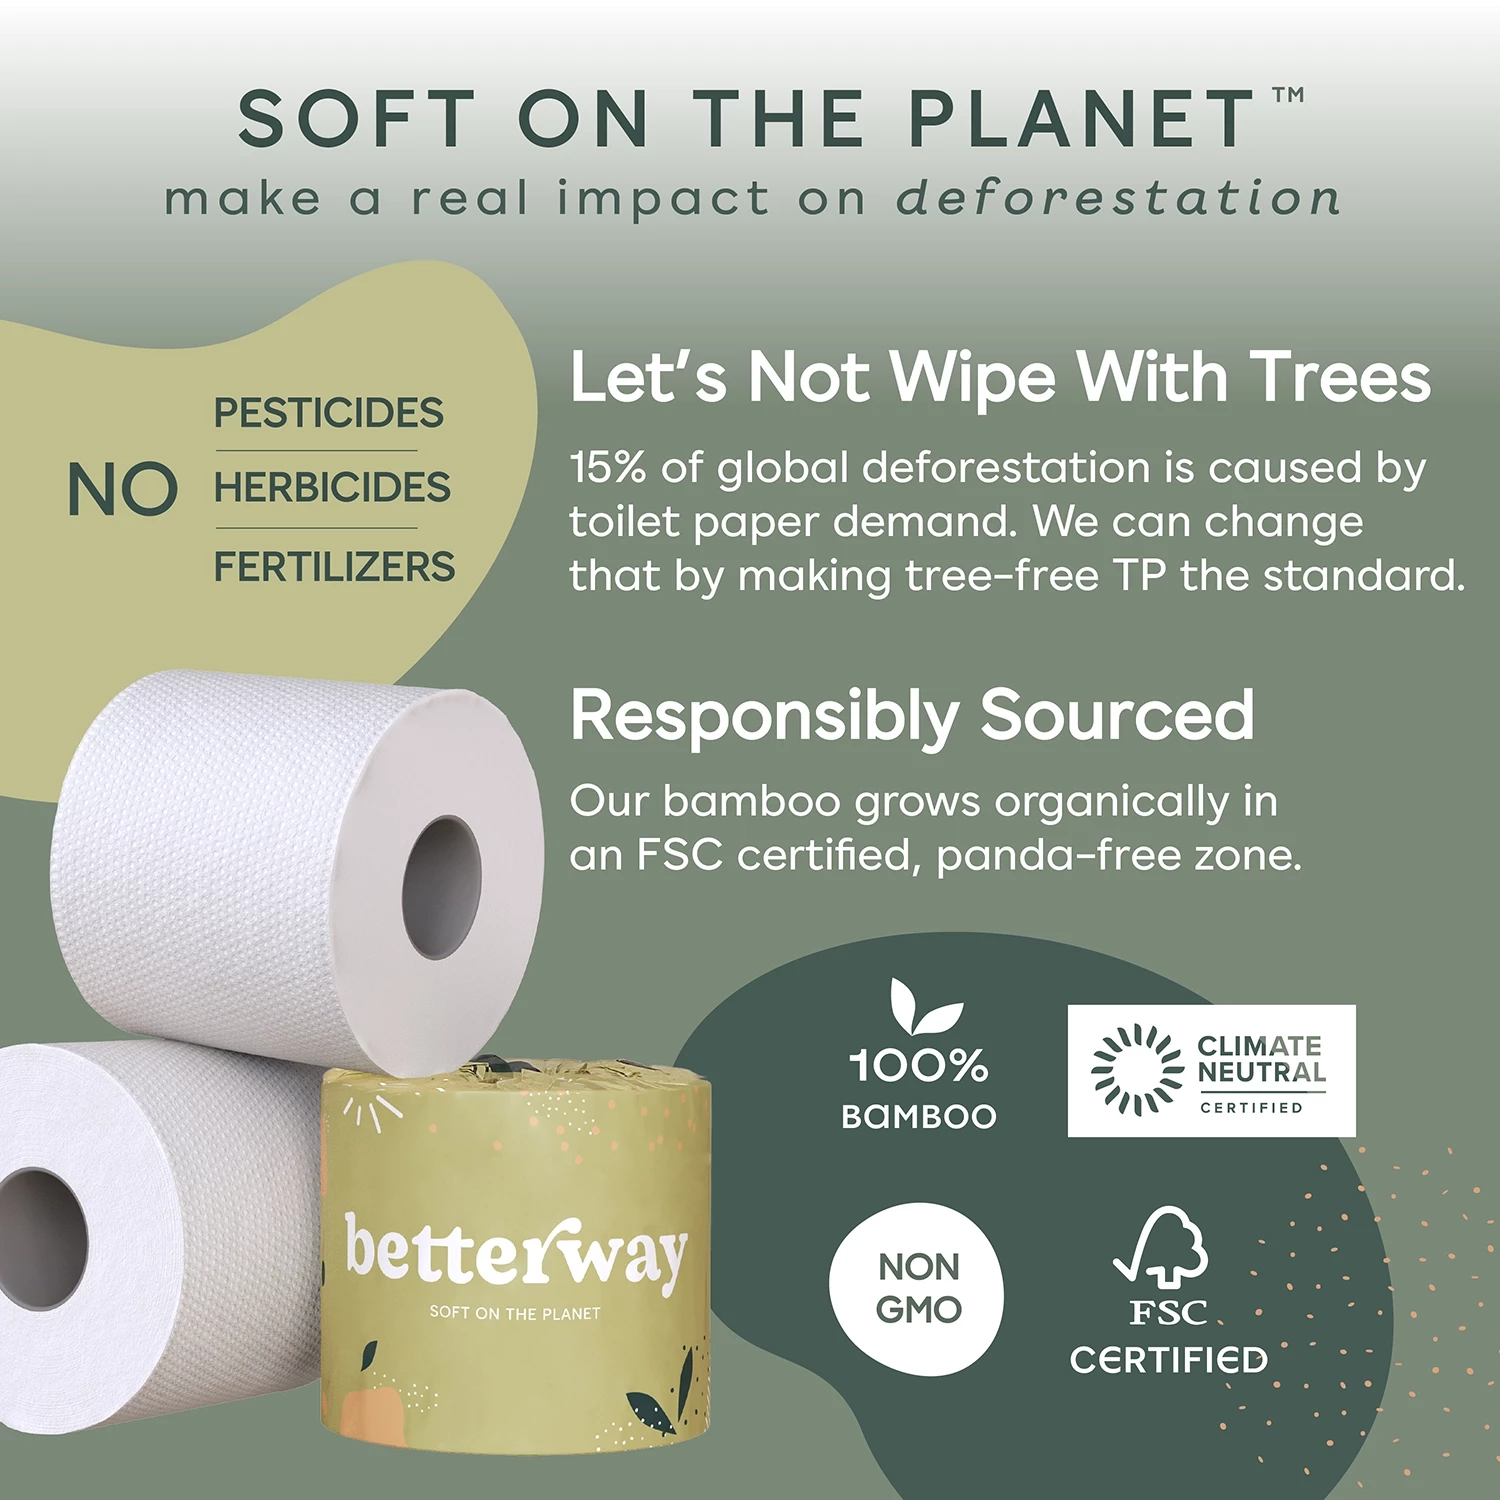 Sort on the planet, make a real impact on deforestation infographic.